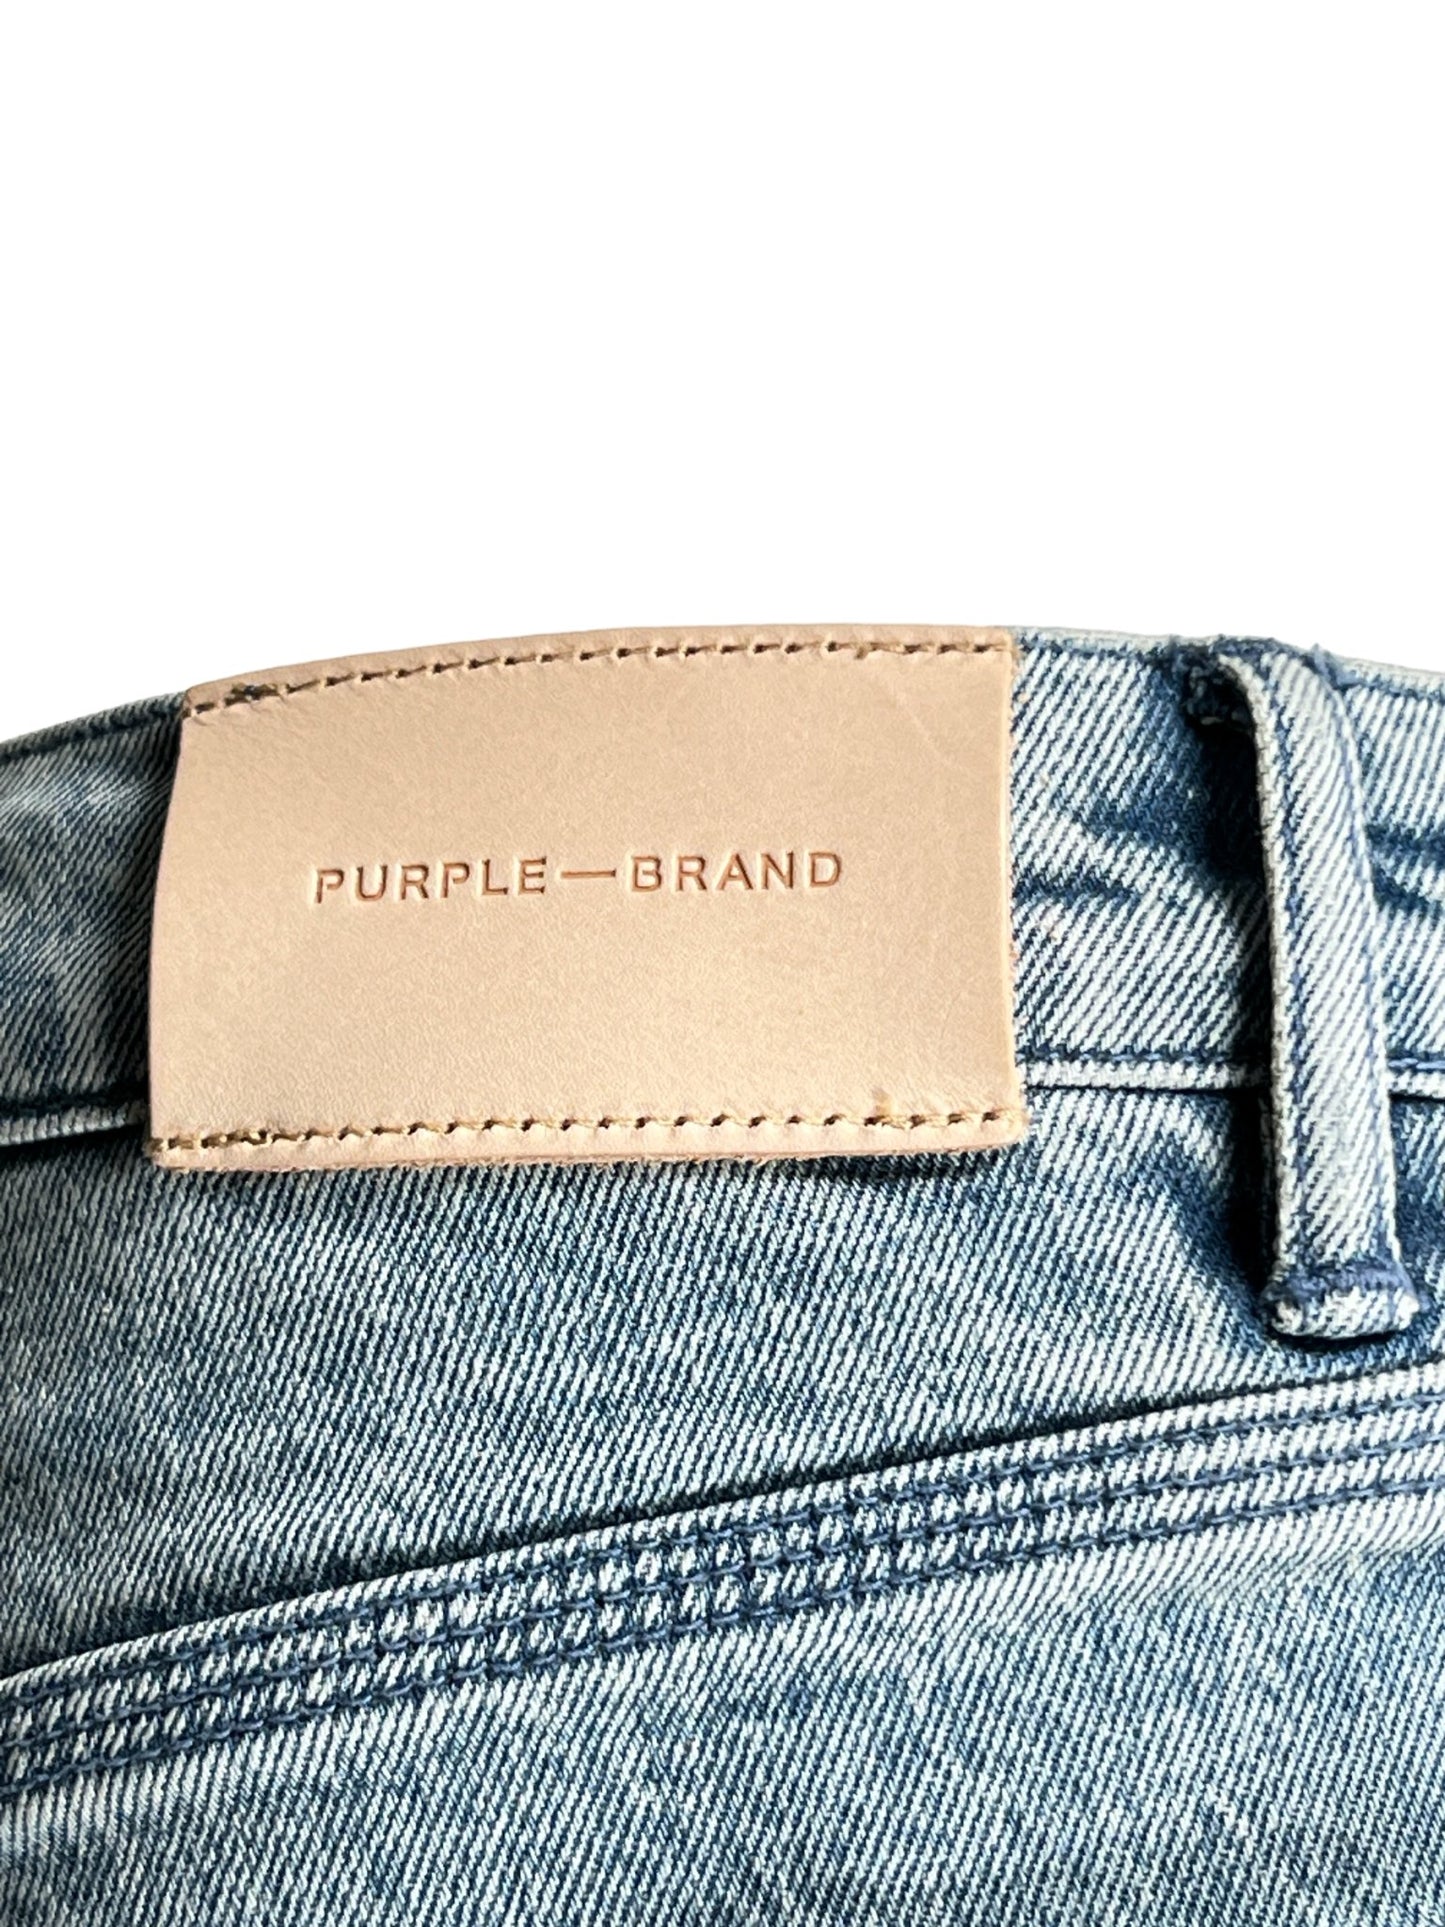 Sentence with replaced product:
Tan leather patch with "PURPLE BRAND" embossed, stitched onto PURPLE BRAND P004-VNSL VINTAGE FLARE LIGHT INDIGO jeans.